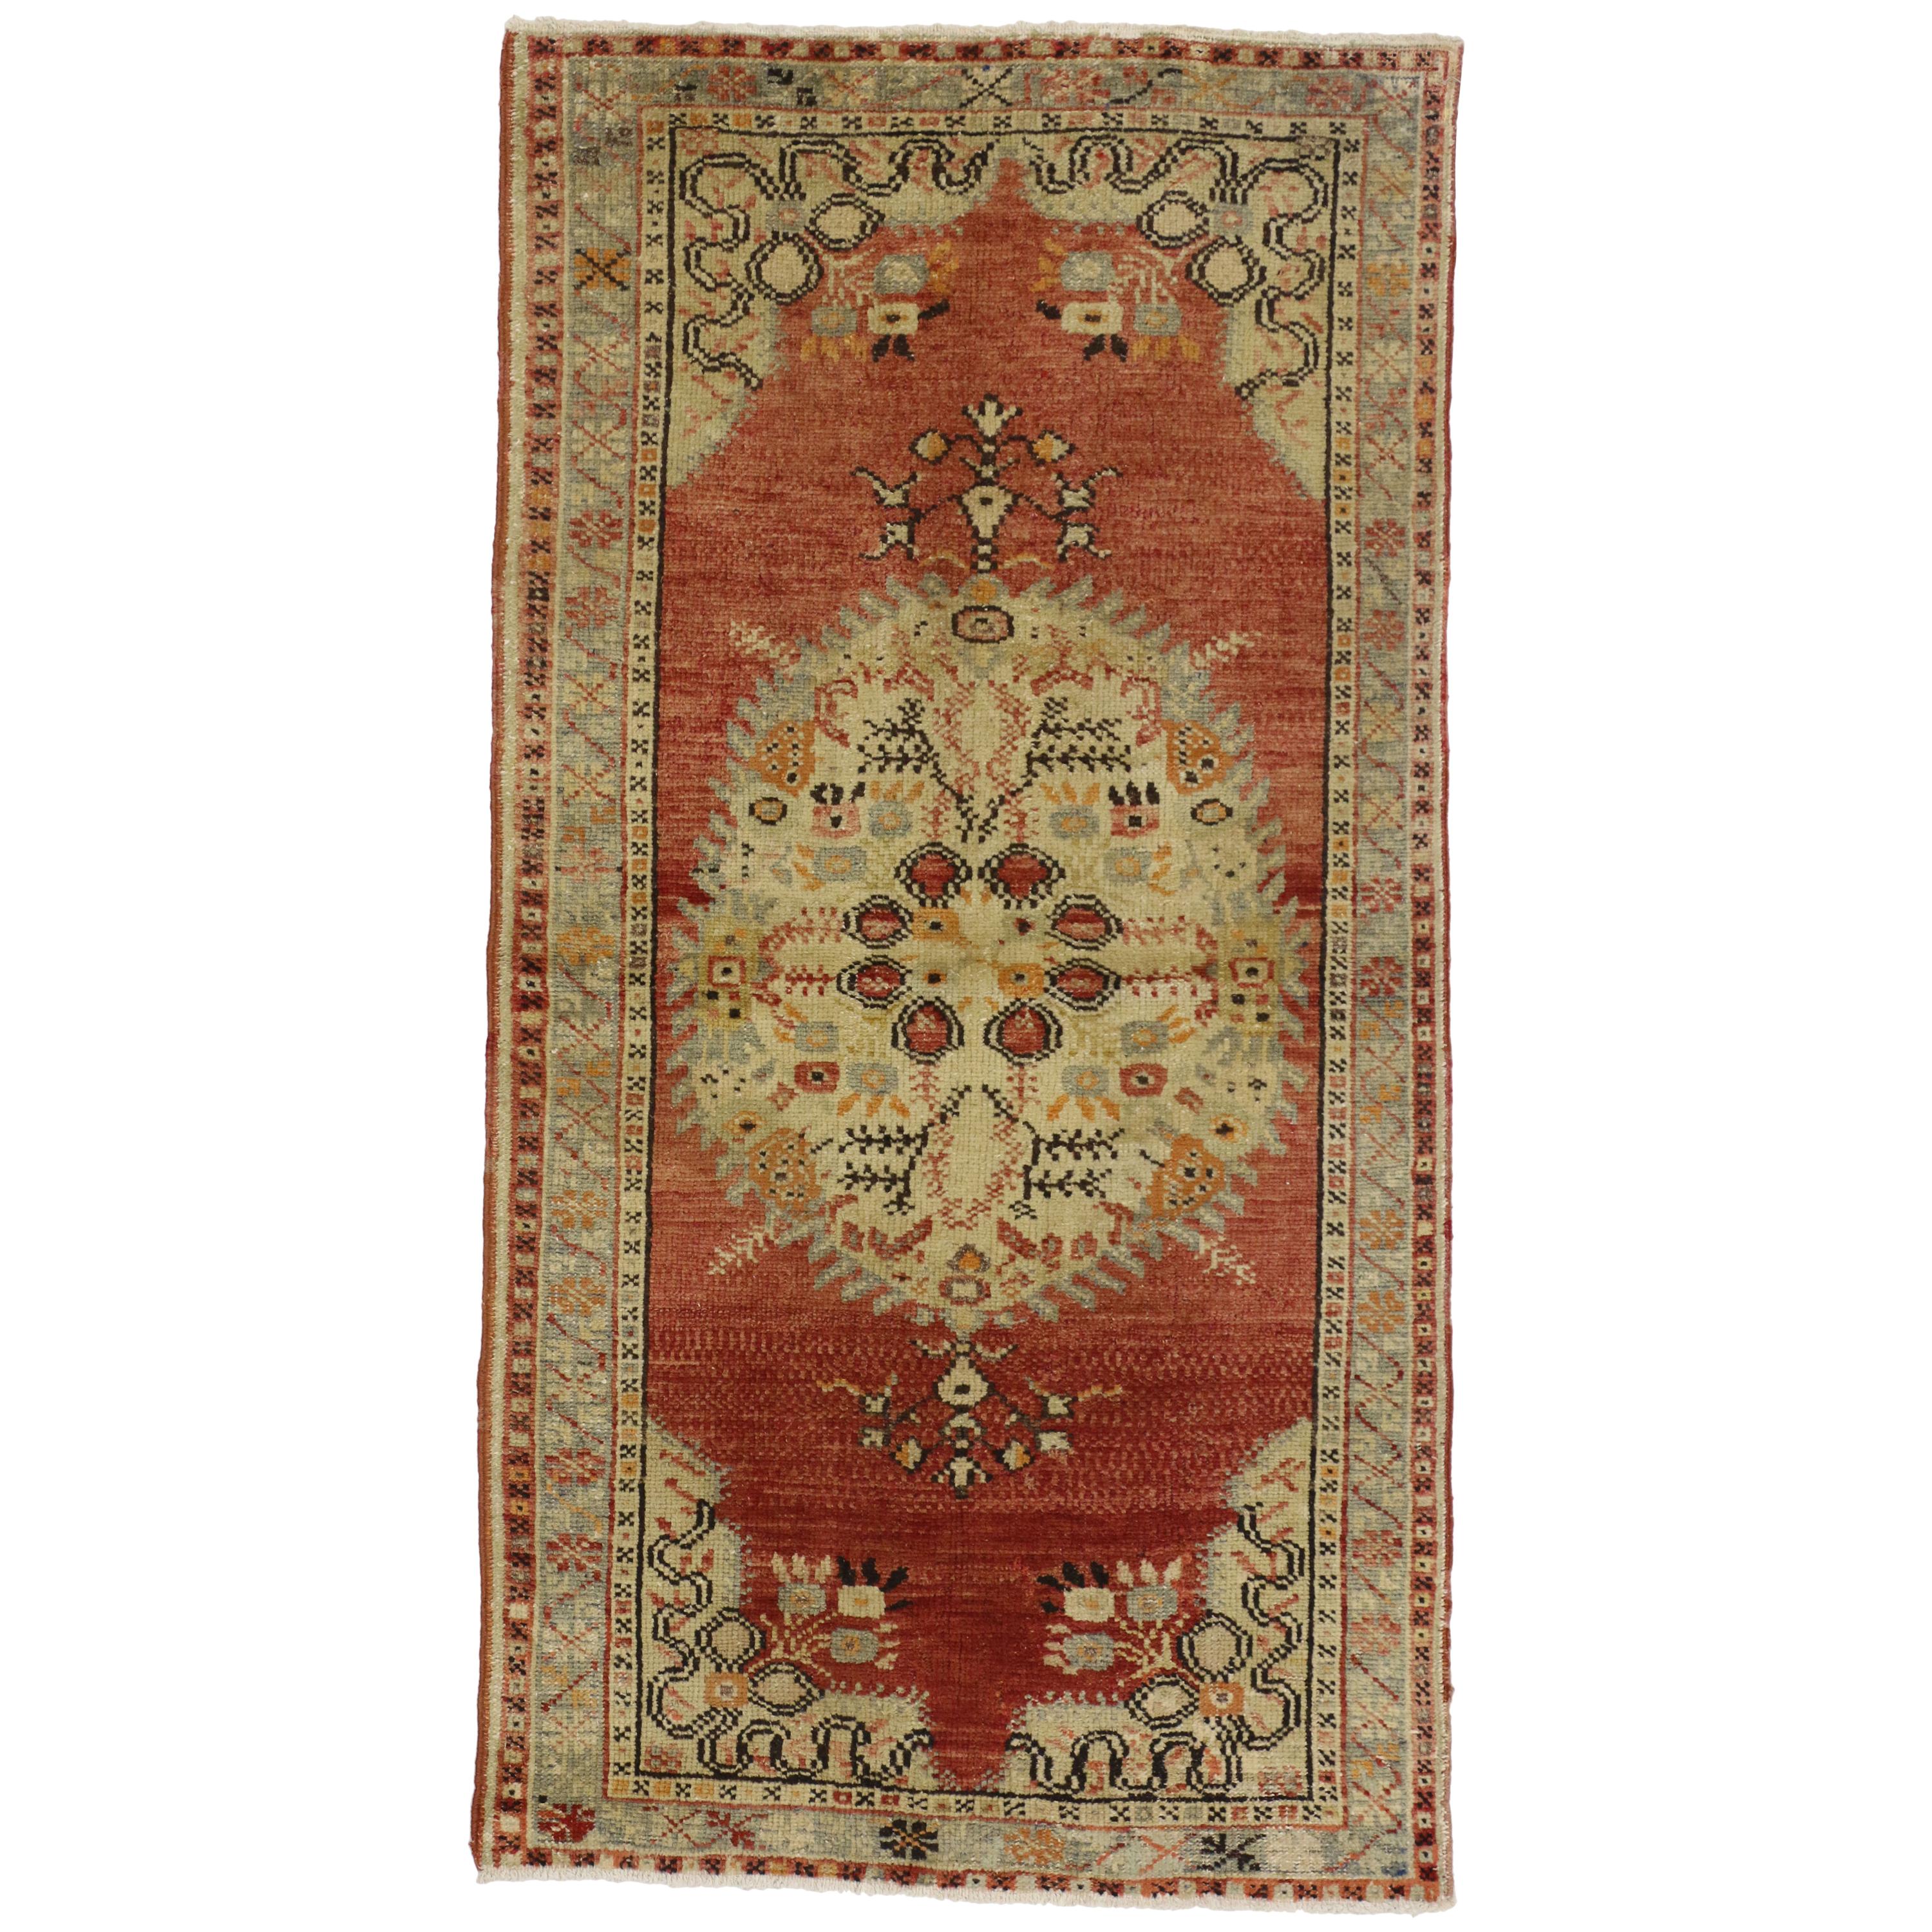 Vintage Turkish Oushak Accent Rug, Entry or Foyer Rug with Rustic Bungalow Style